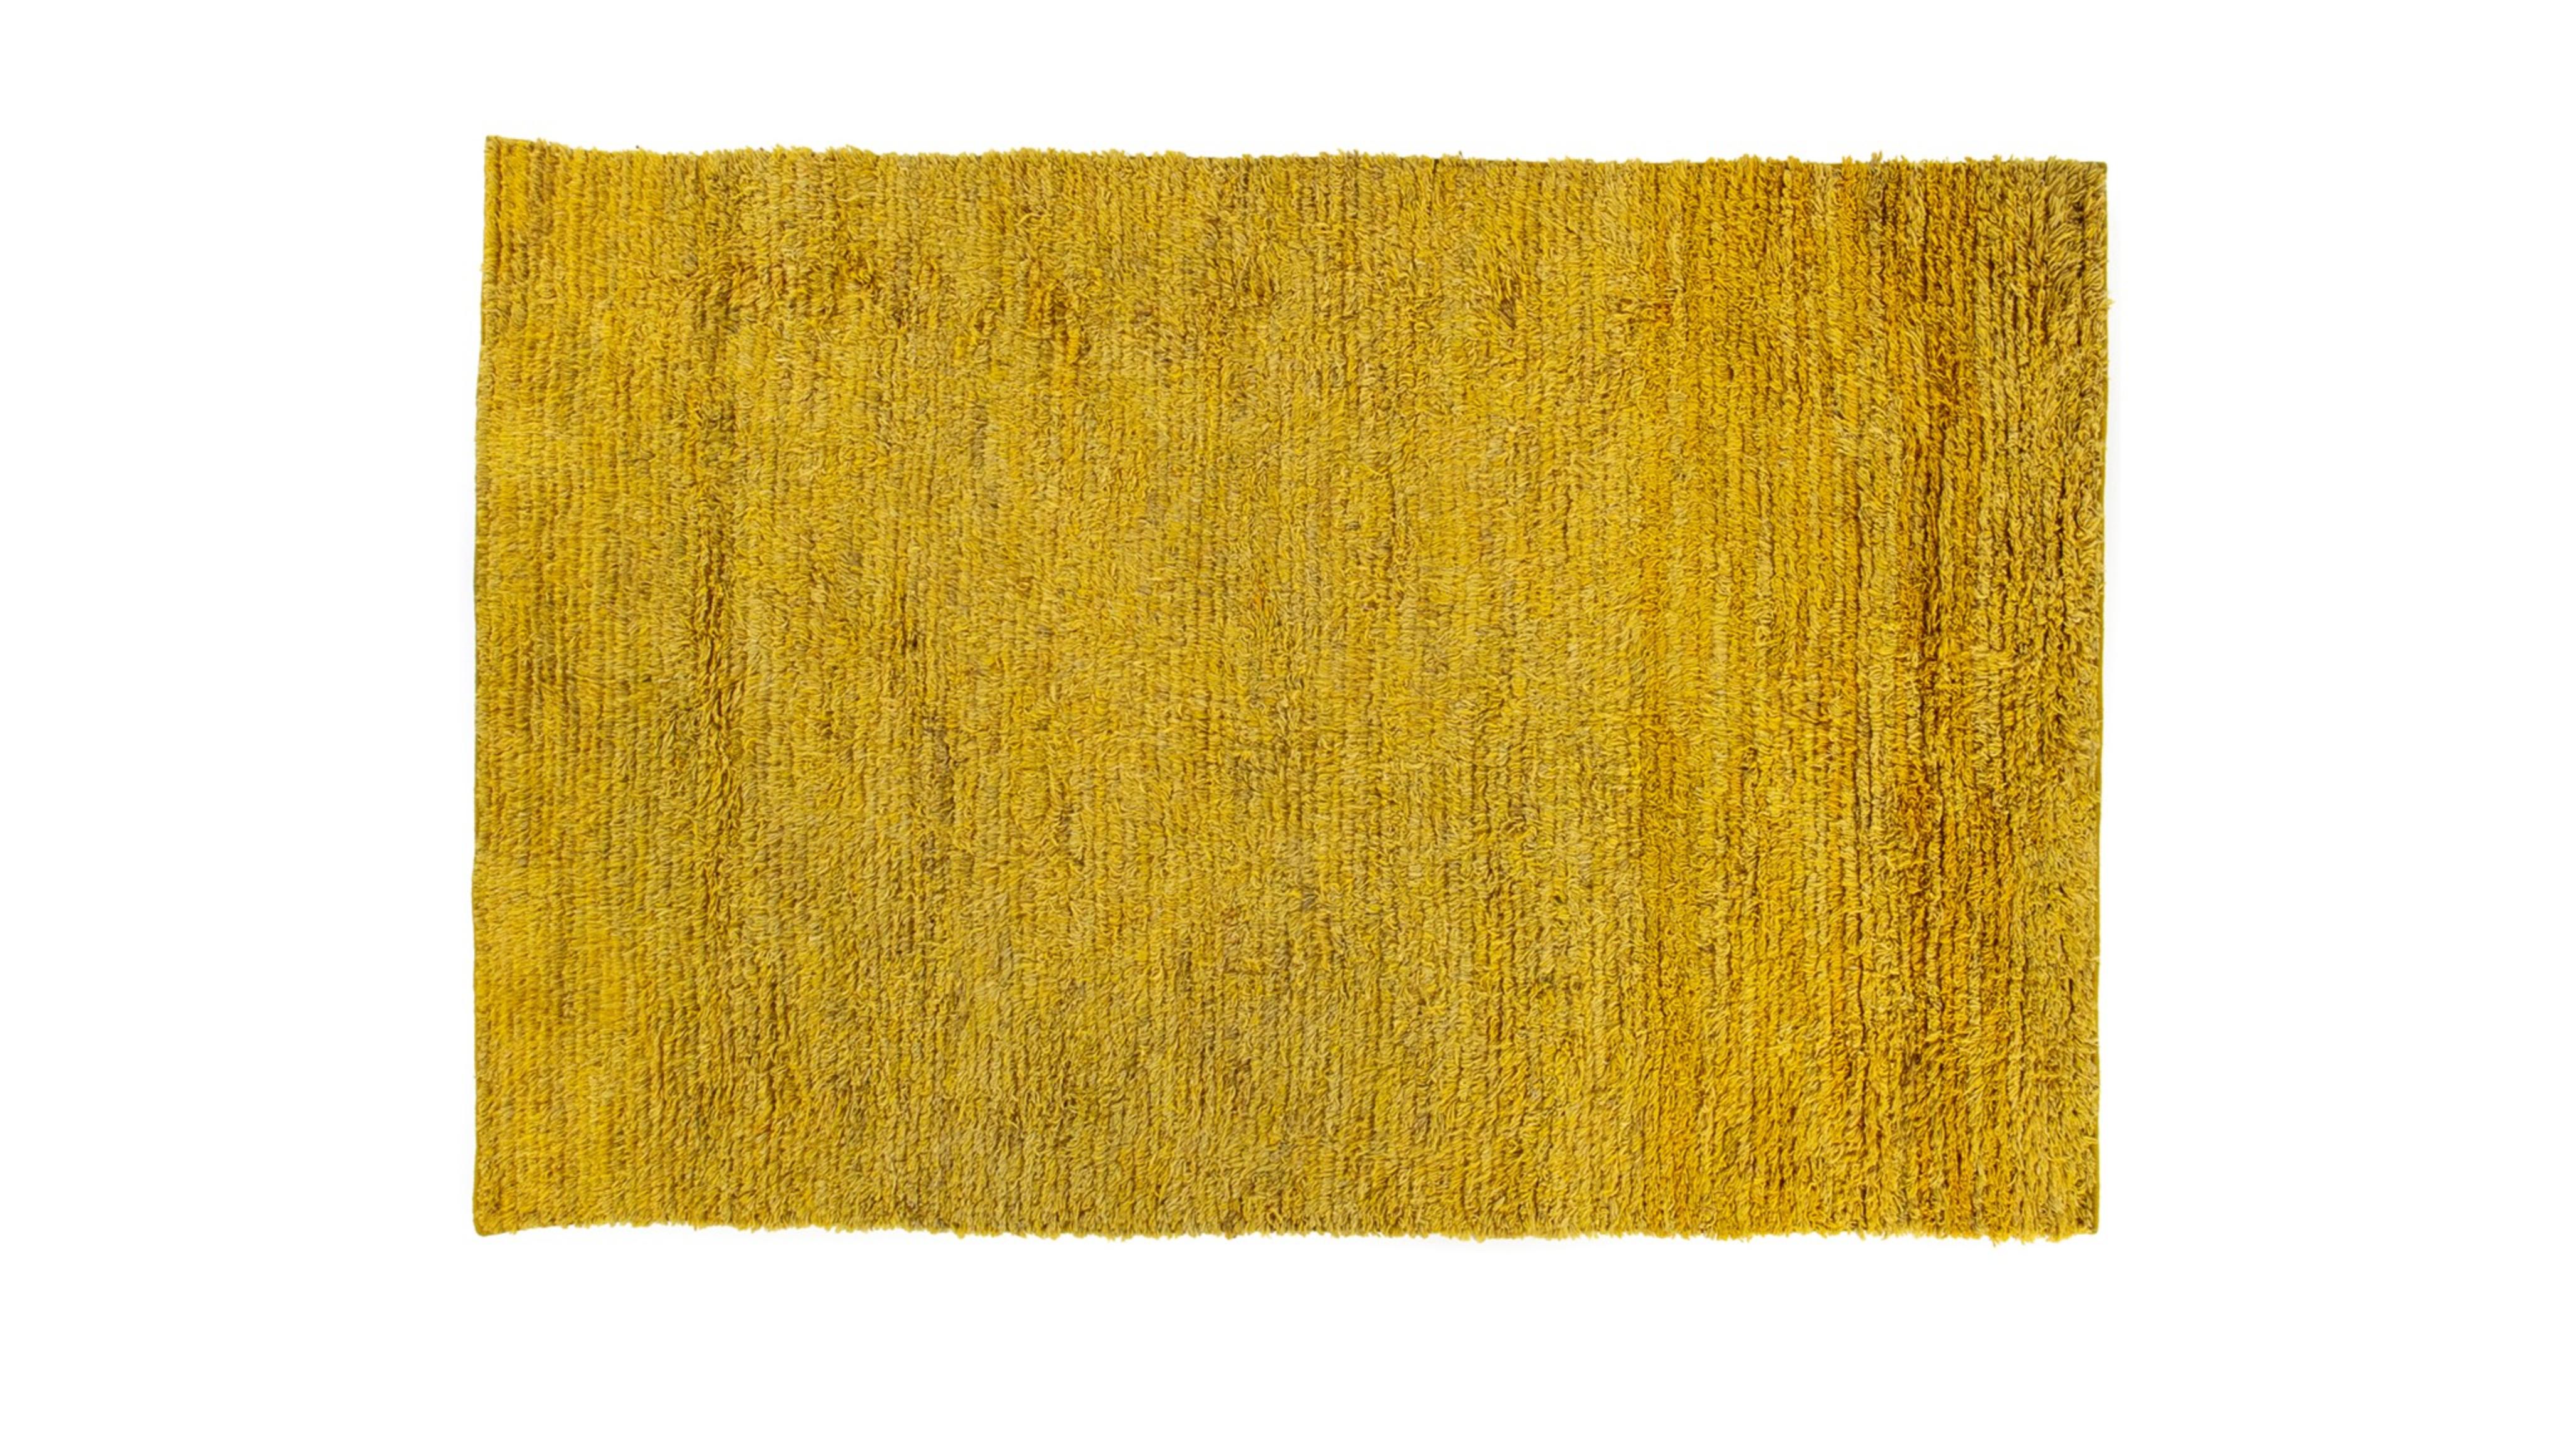 Gabbeh Rug by Taher Asad Bakhtiari
Dimensions: W 190 x L 290 cm
Materials: Wool

Taher Asad-Bakhtiari (B.1982, Tehran) is a self-taught artist whose practice focuses on, but is not limited to, objects, textiles and experiences.
After studying